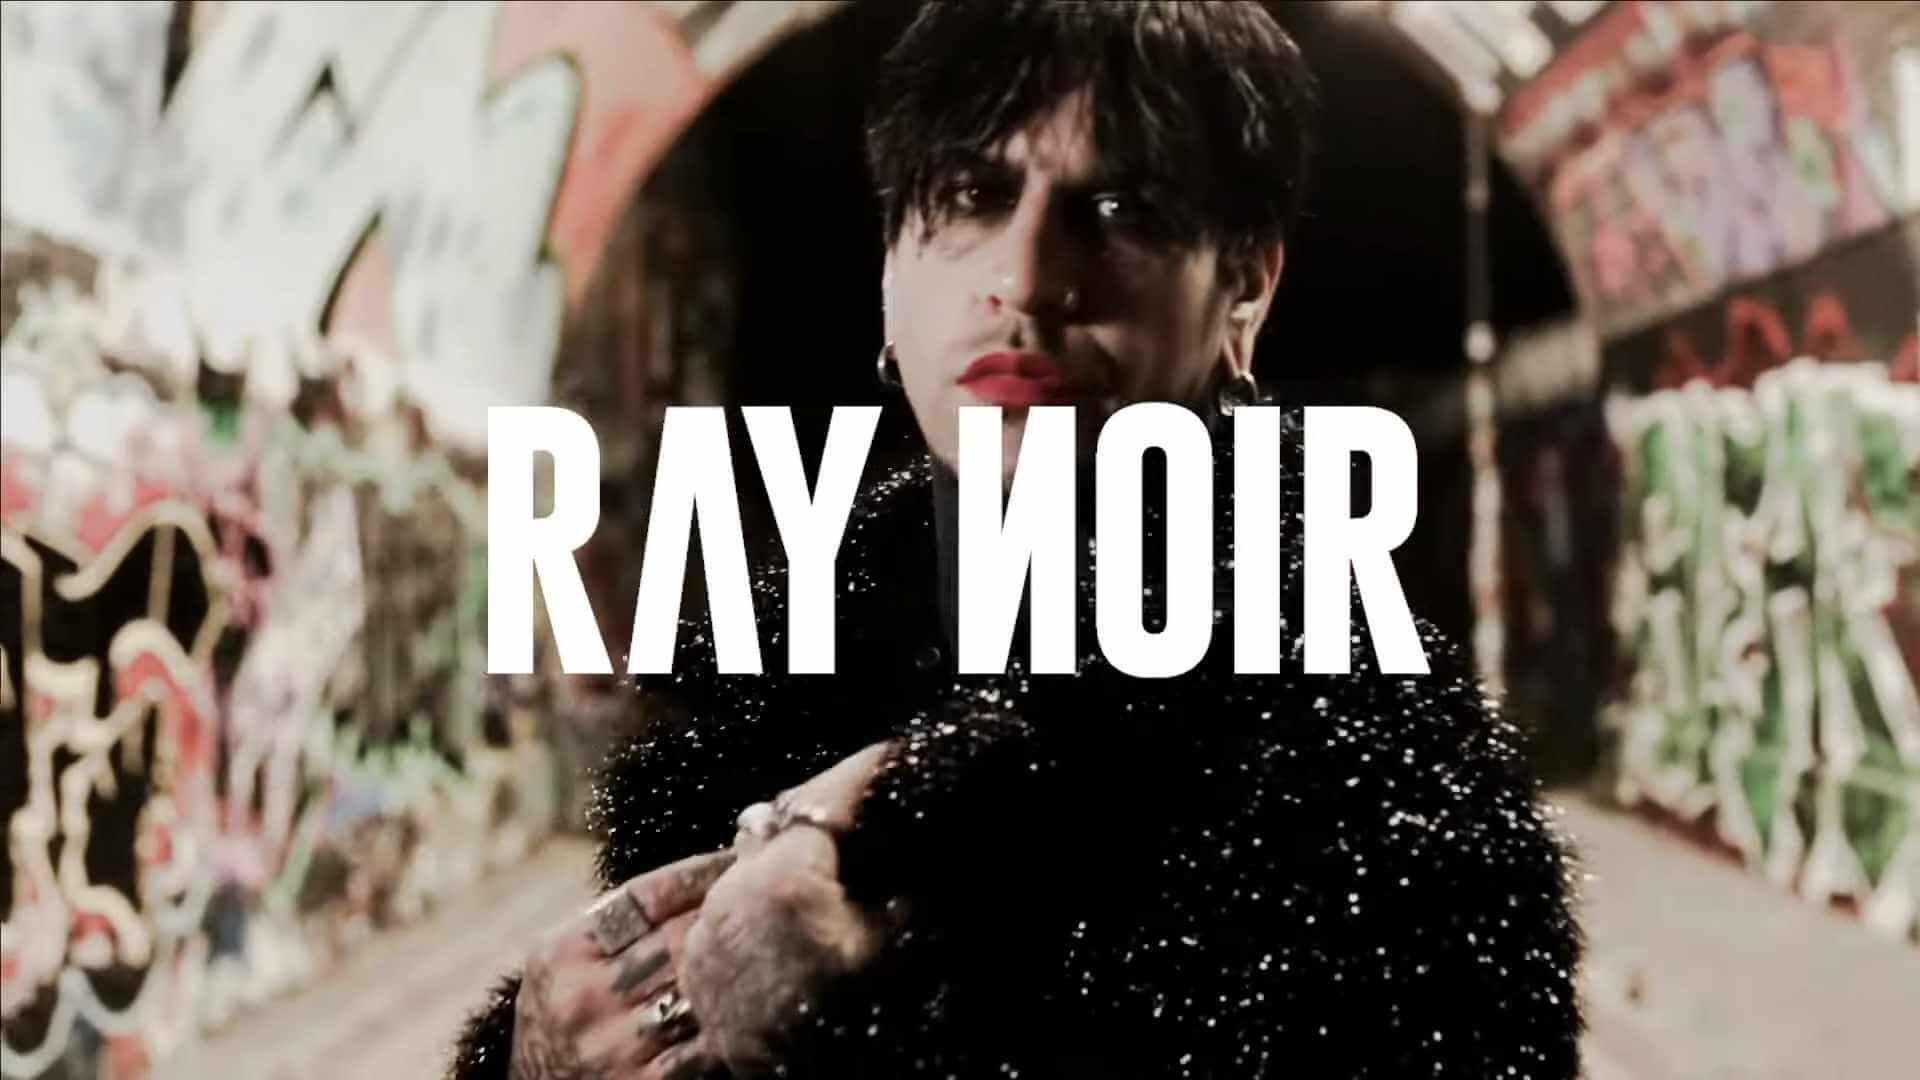 Ray Noir - Pity Party